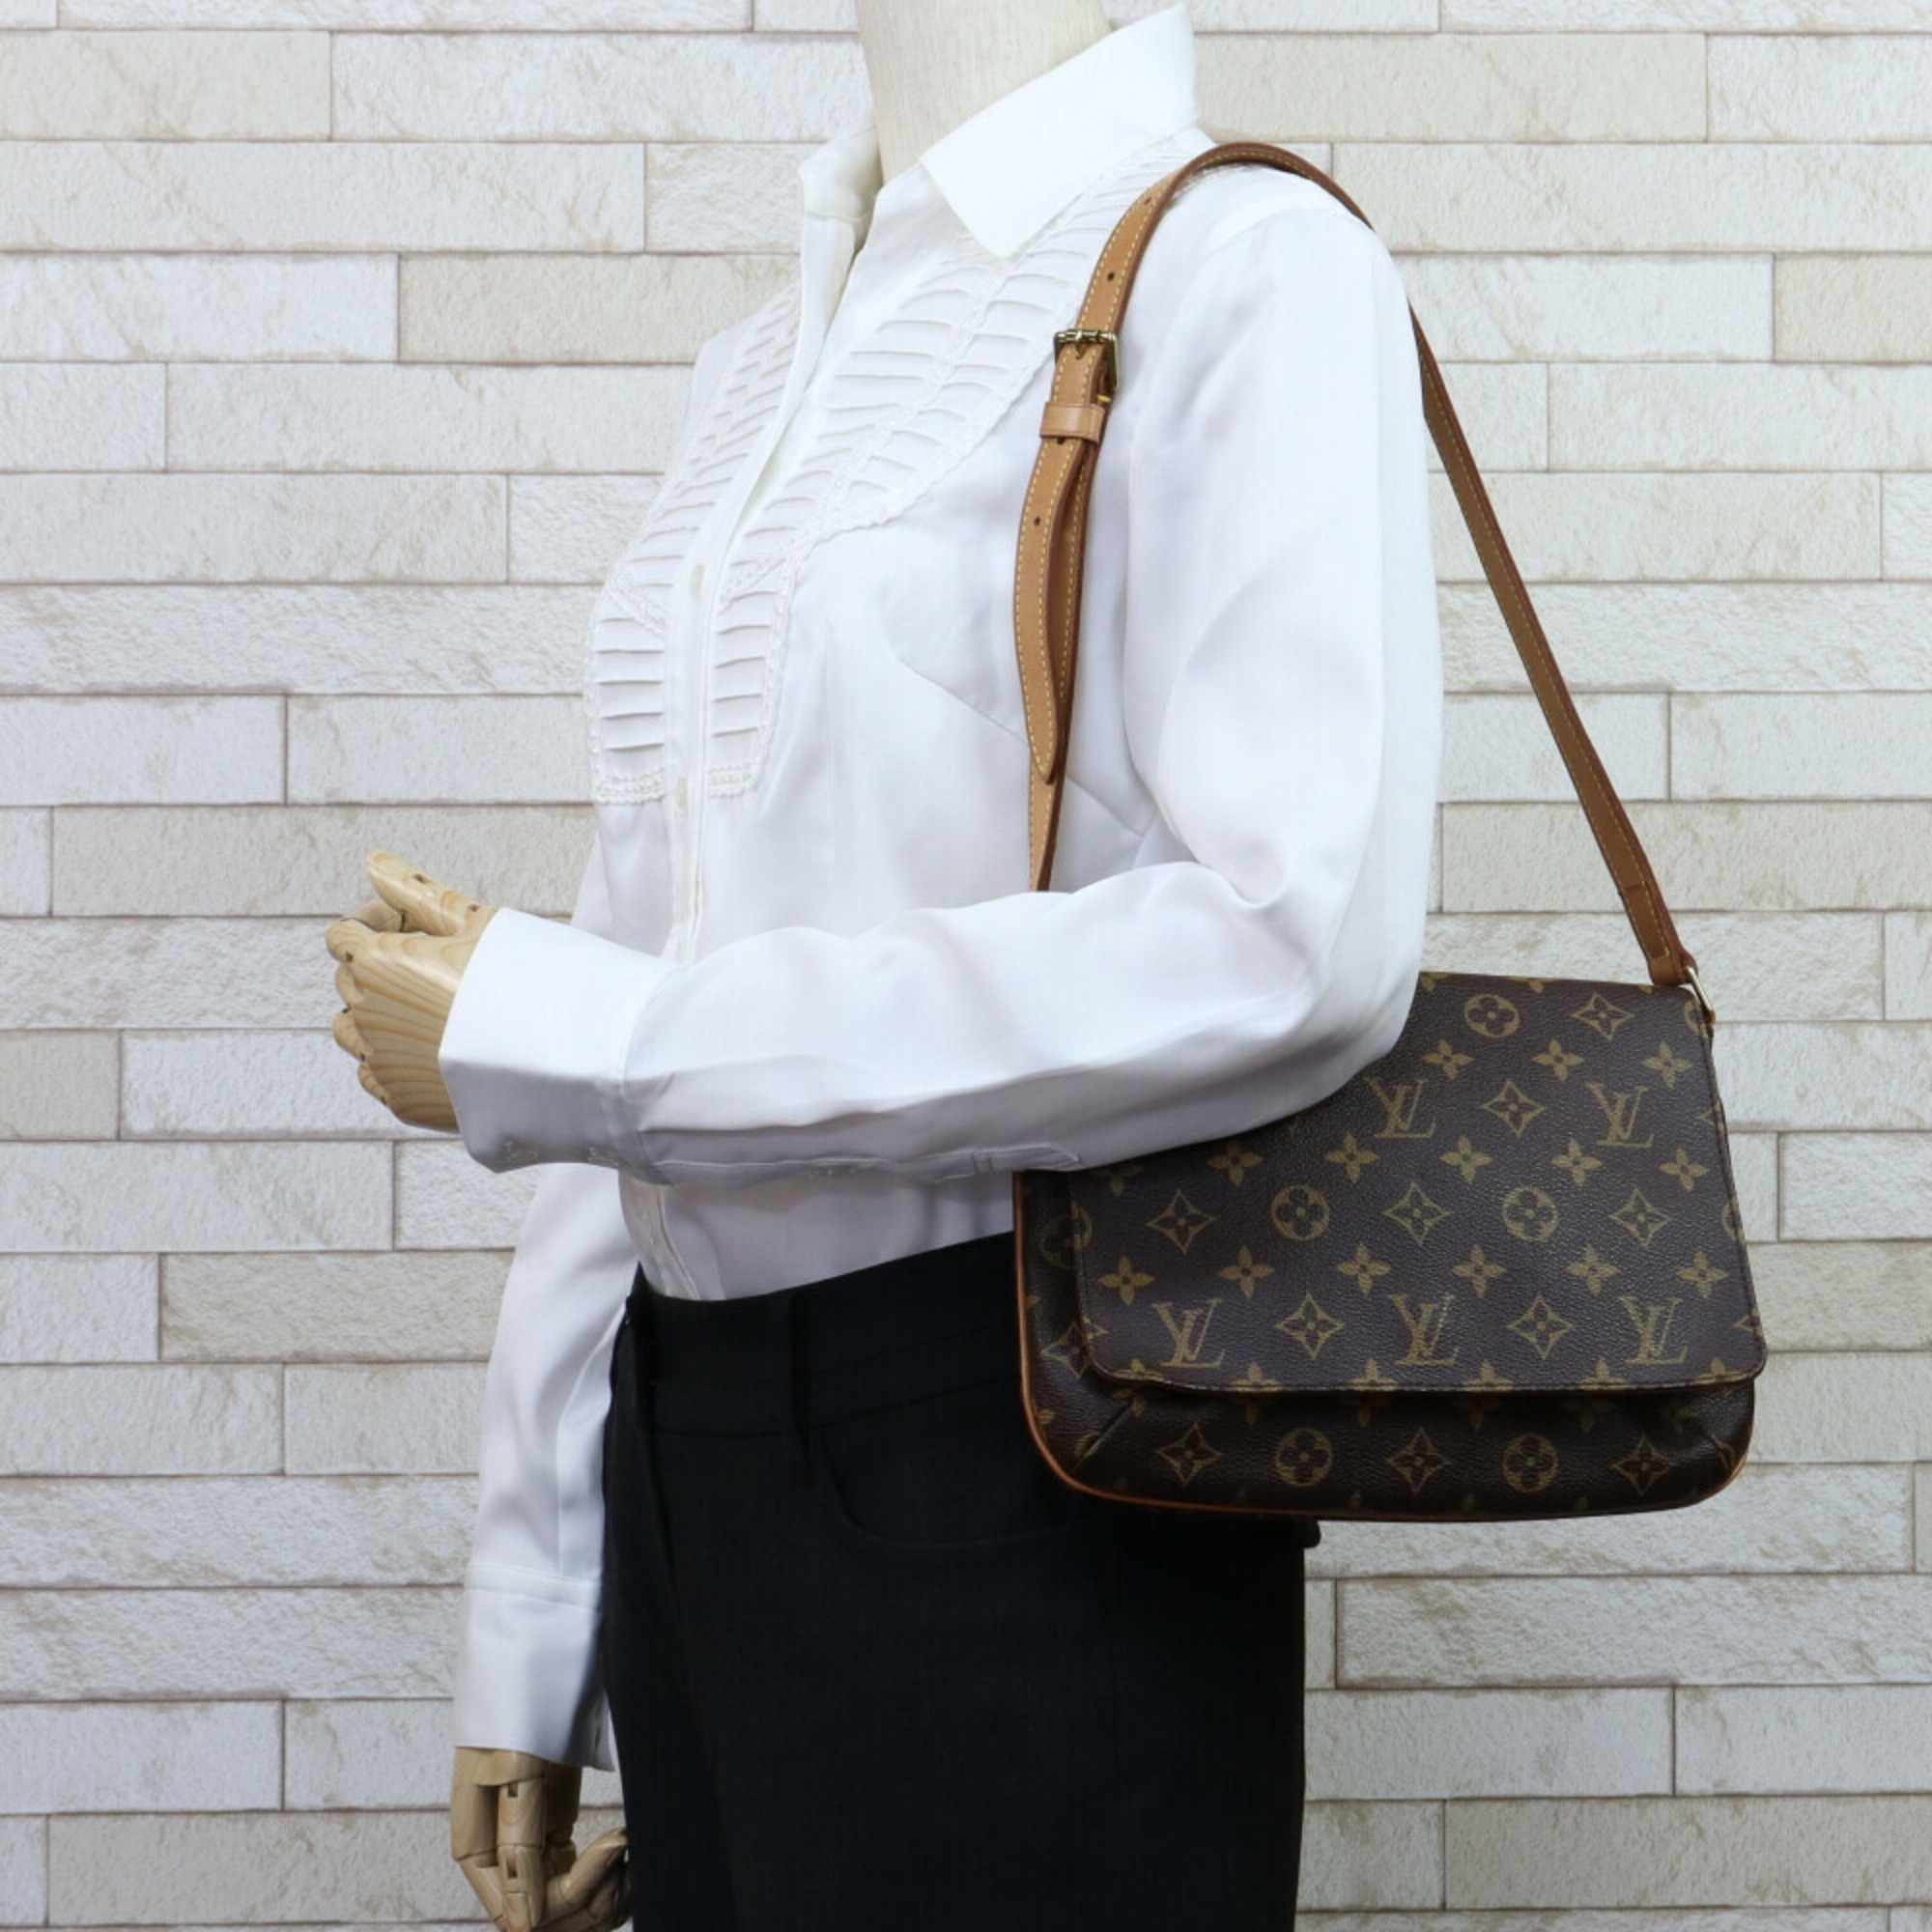 Louis Vuitton - Authenticated Musette Tango Handbag - Polyester Brown for Women, Very Good Condition